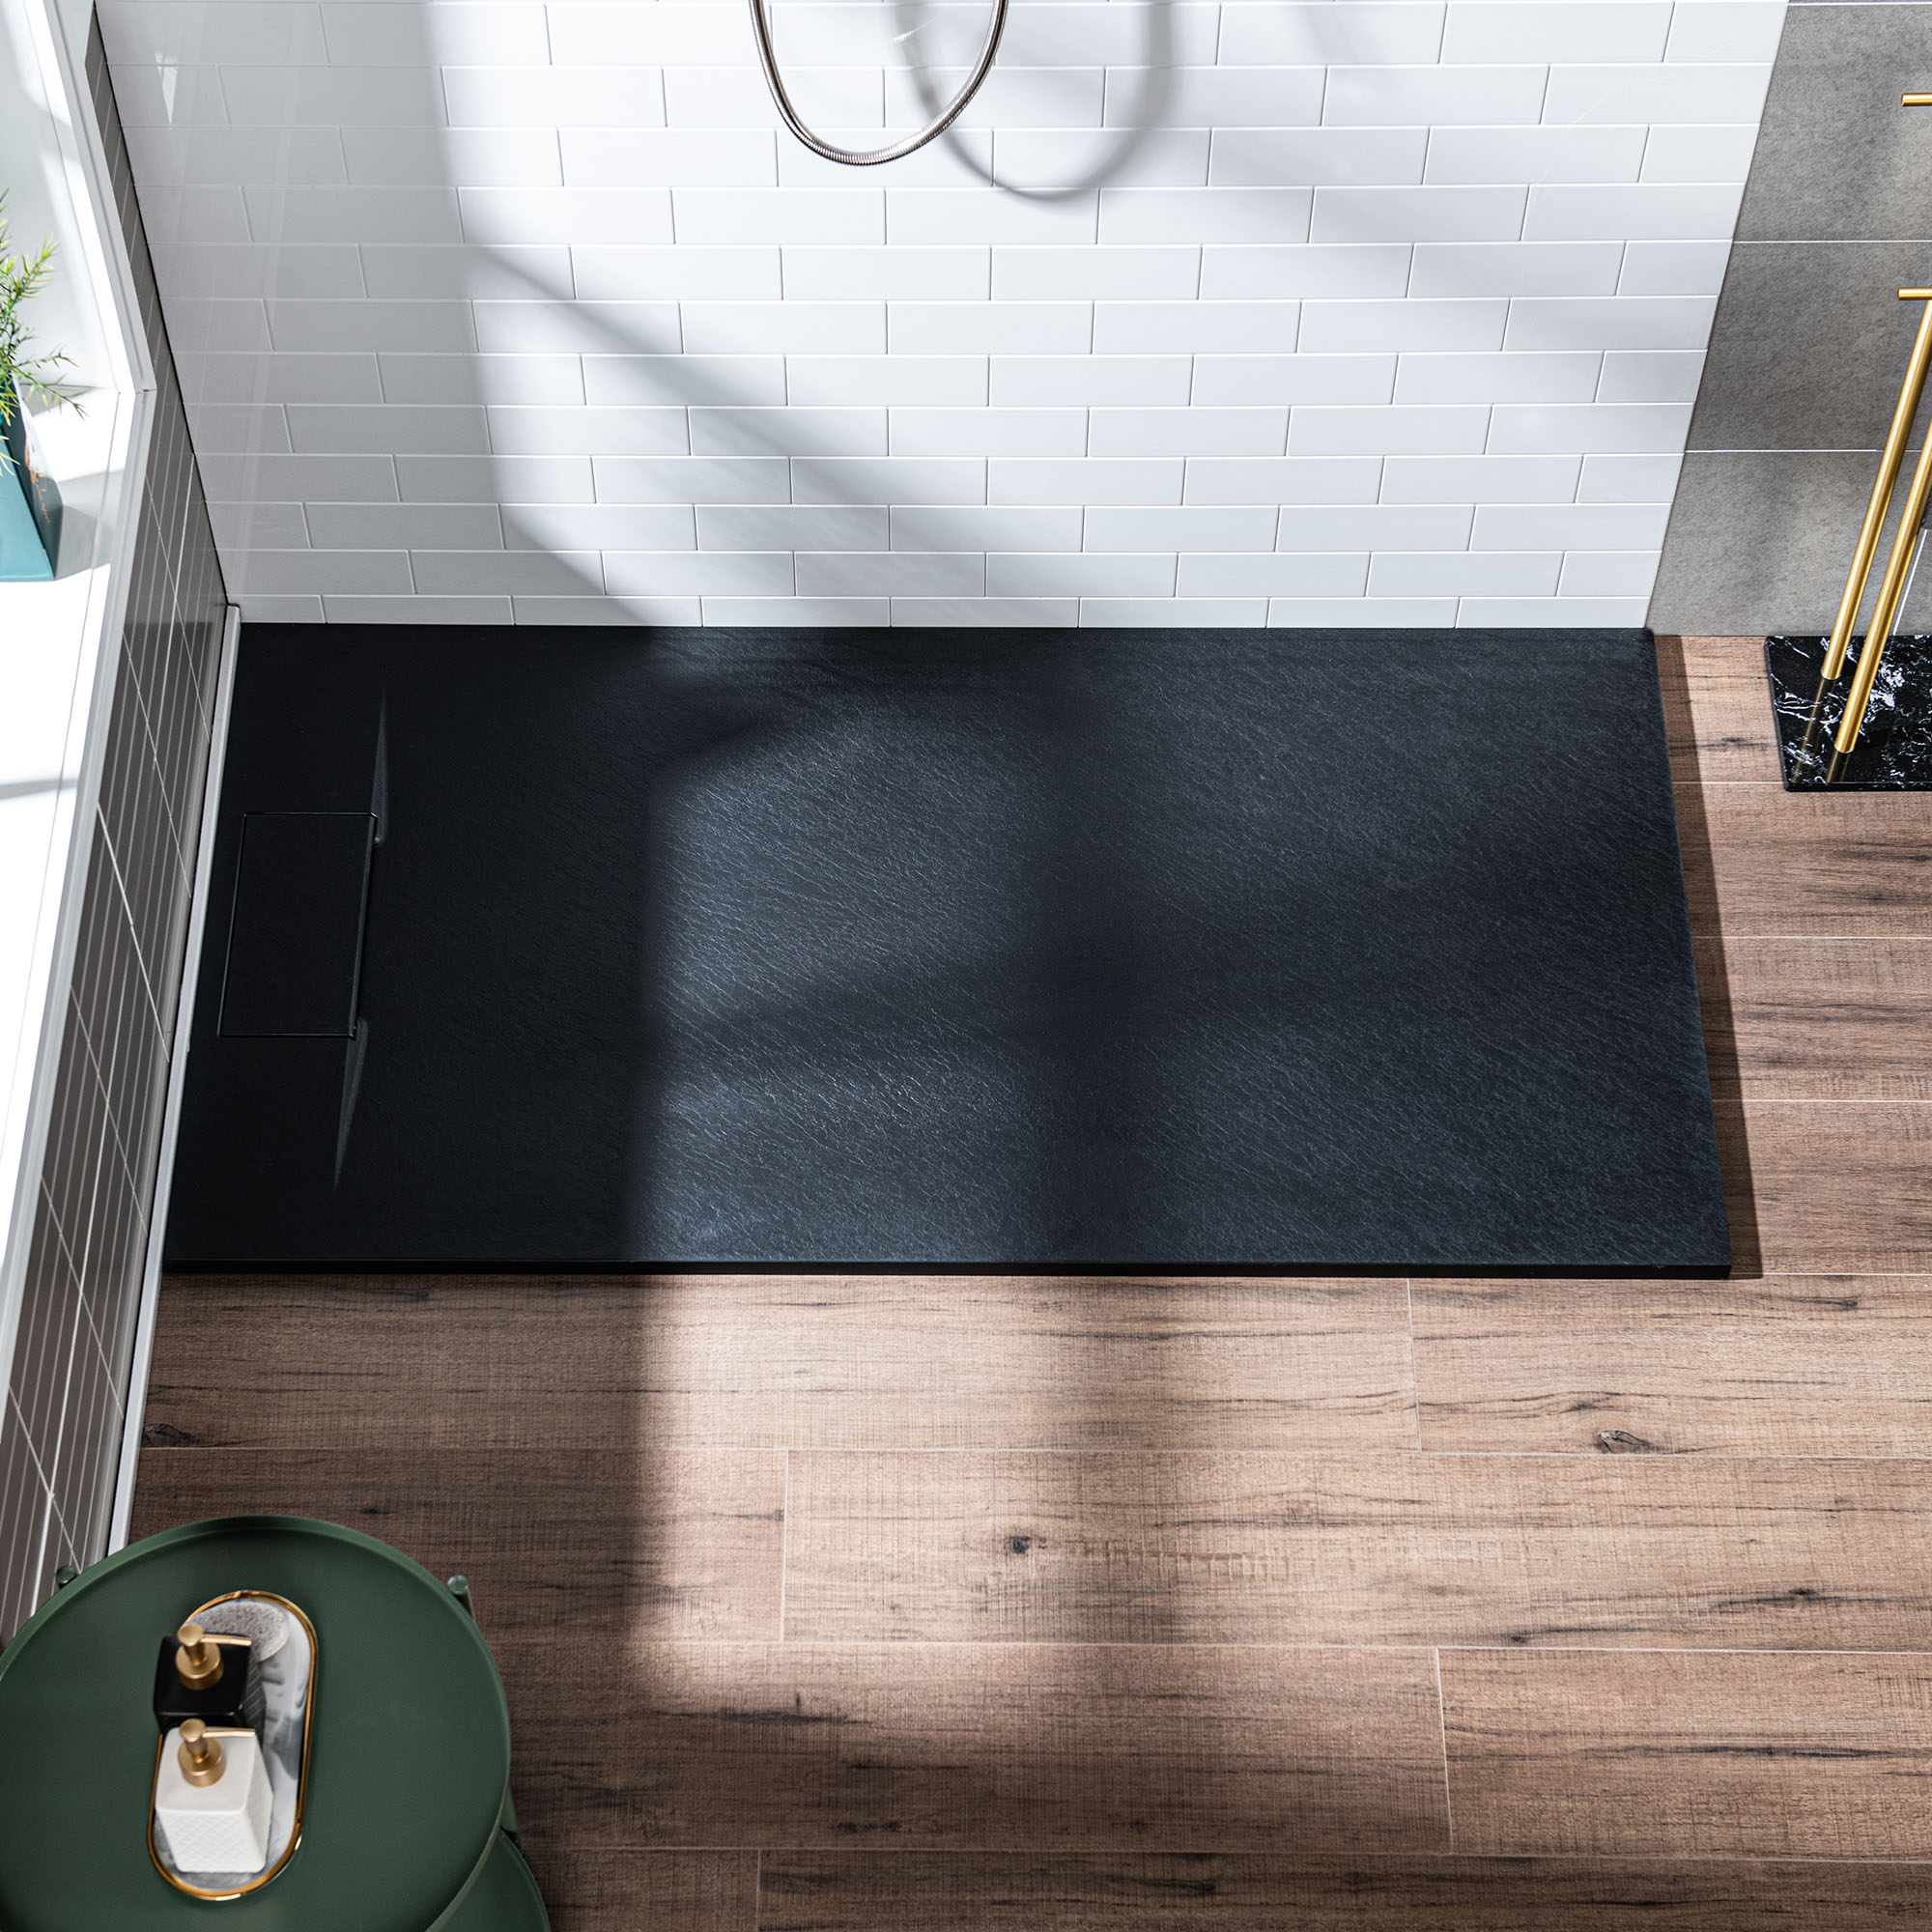  WOODBRIDGE 48-in L x 32-in W Zero Threshold End Drain Shower Base with Reversable Drain Placement, Matching Decorative Drain Plate and Tile Flange, Wheel Chair Access, Low Profile, Black_12364